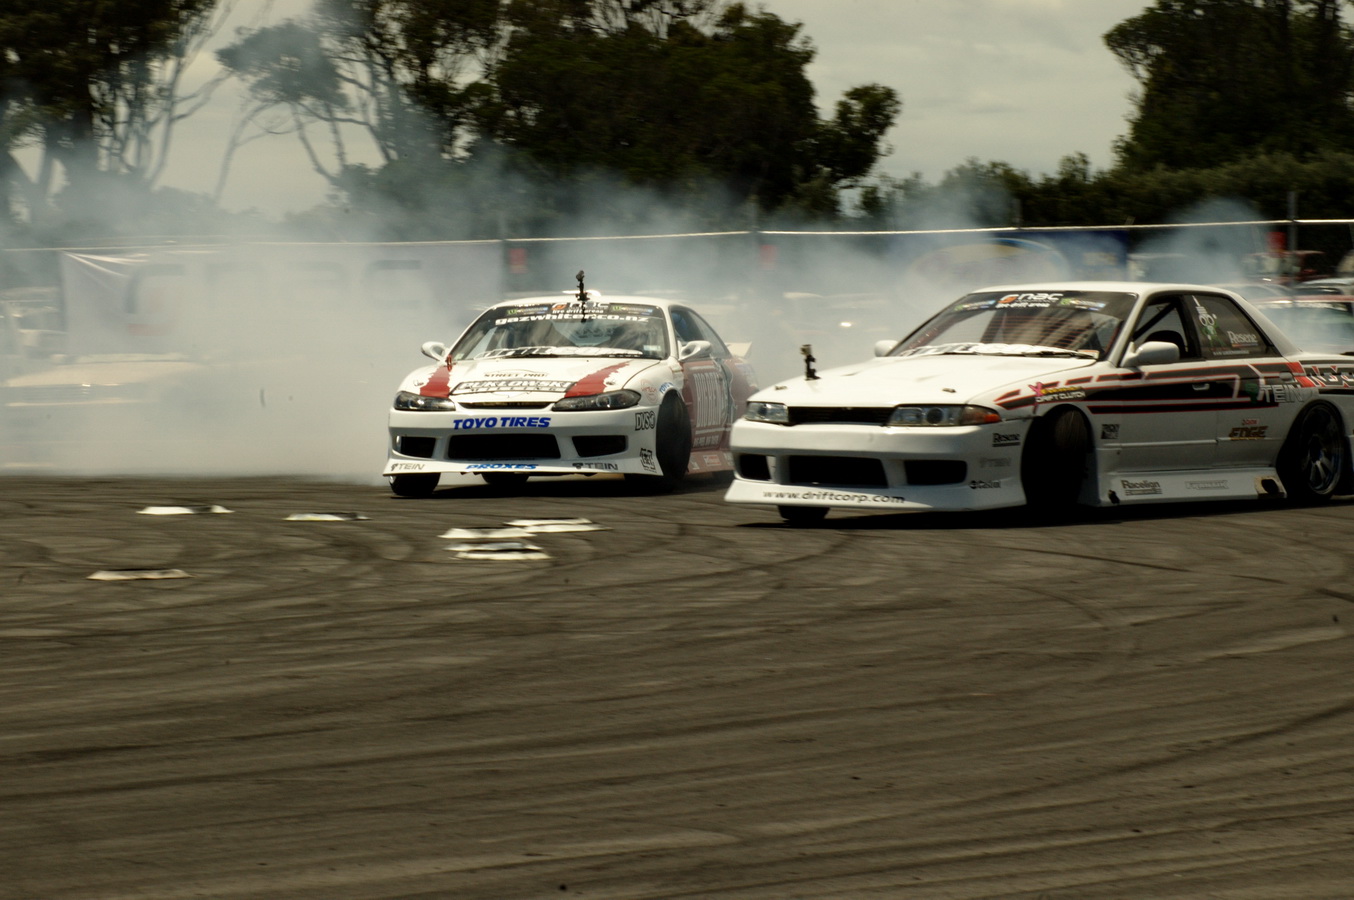 Luke Smith in his S14 its powered by a 230kw SR20DET which was a